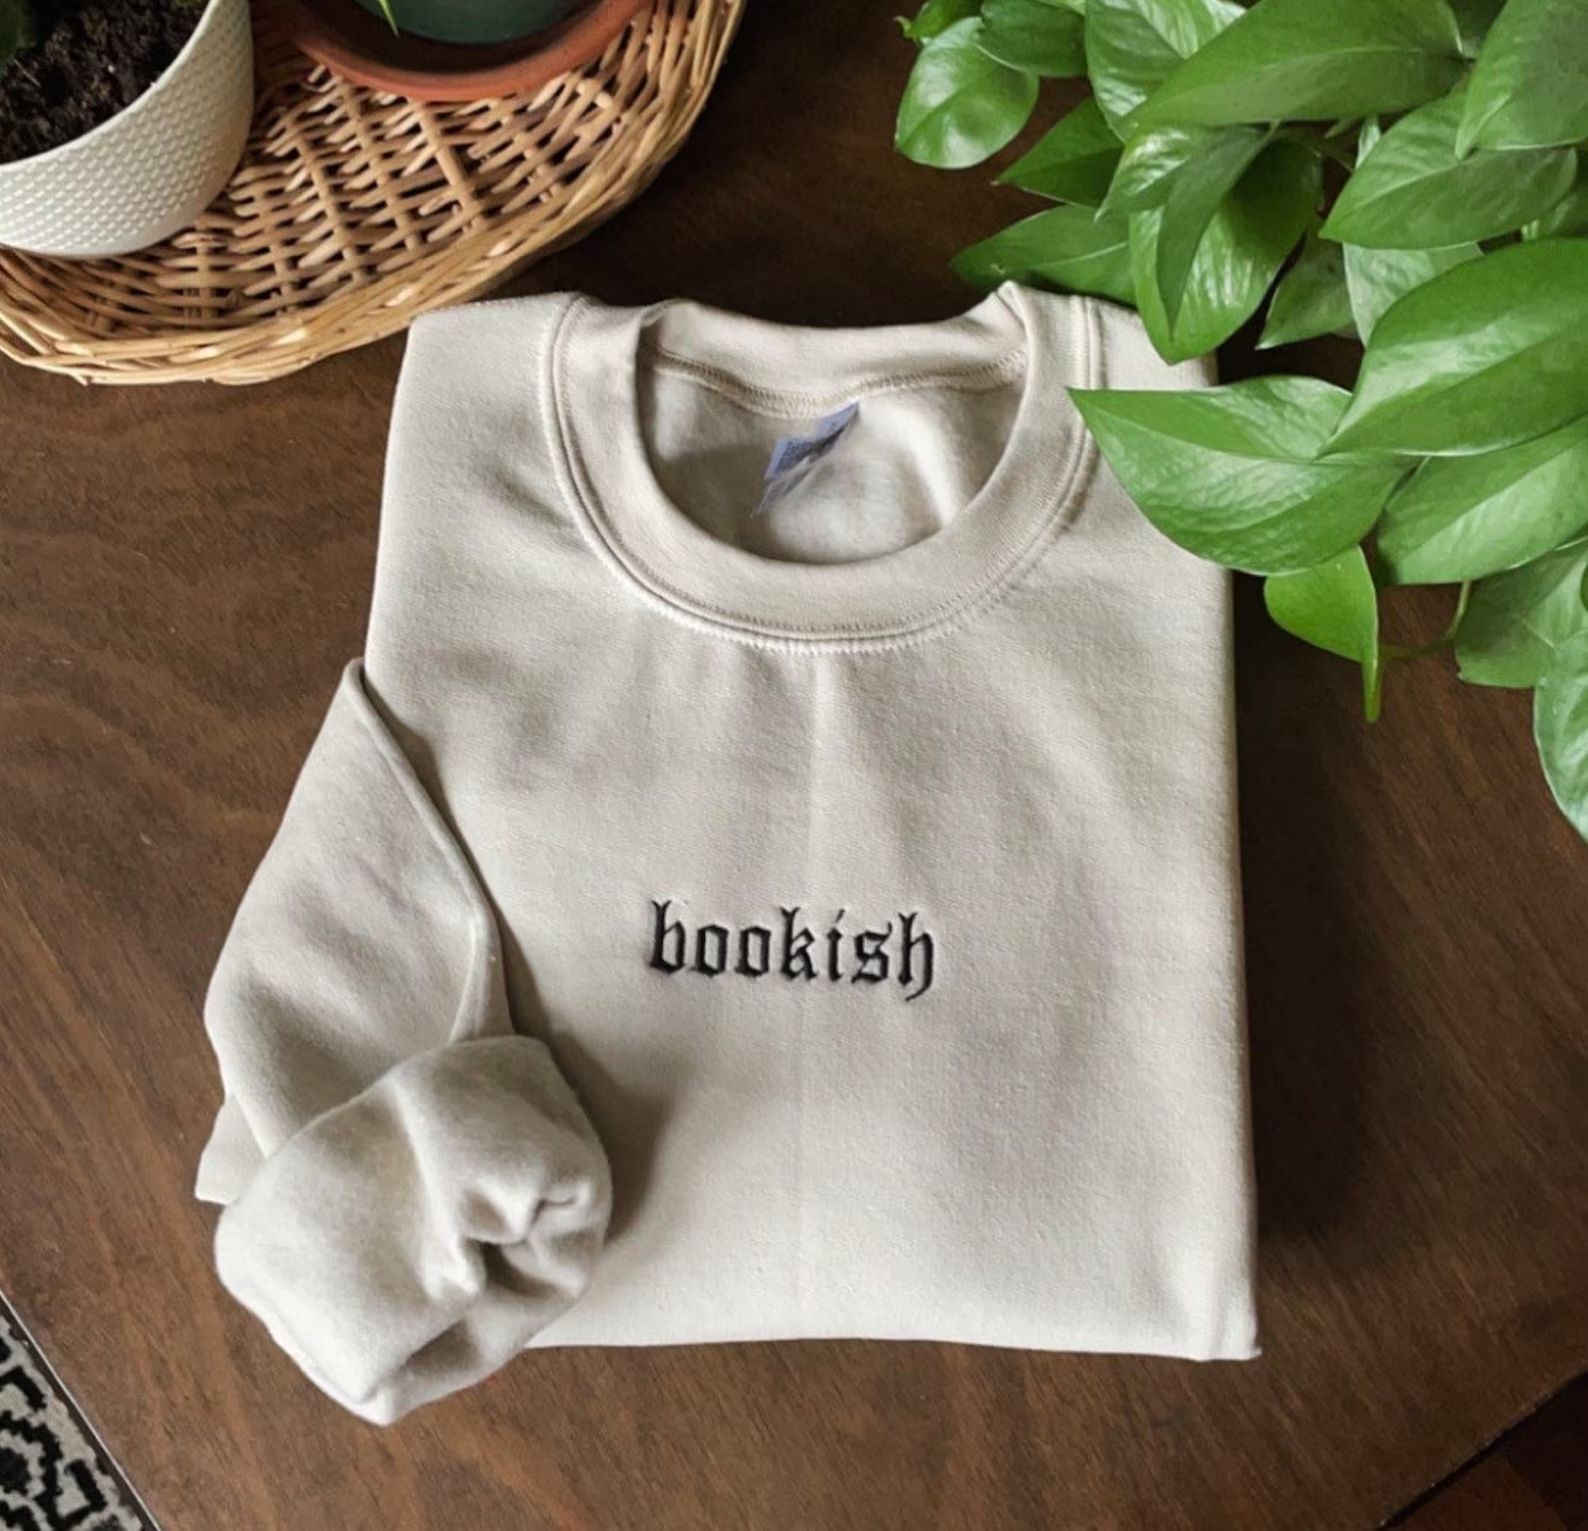 crewneck sweatshirt with bookish embroidered in a gothic font